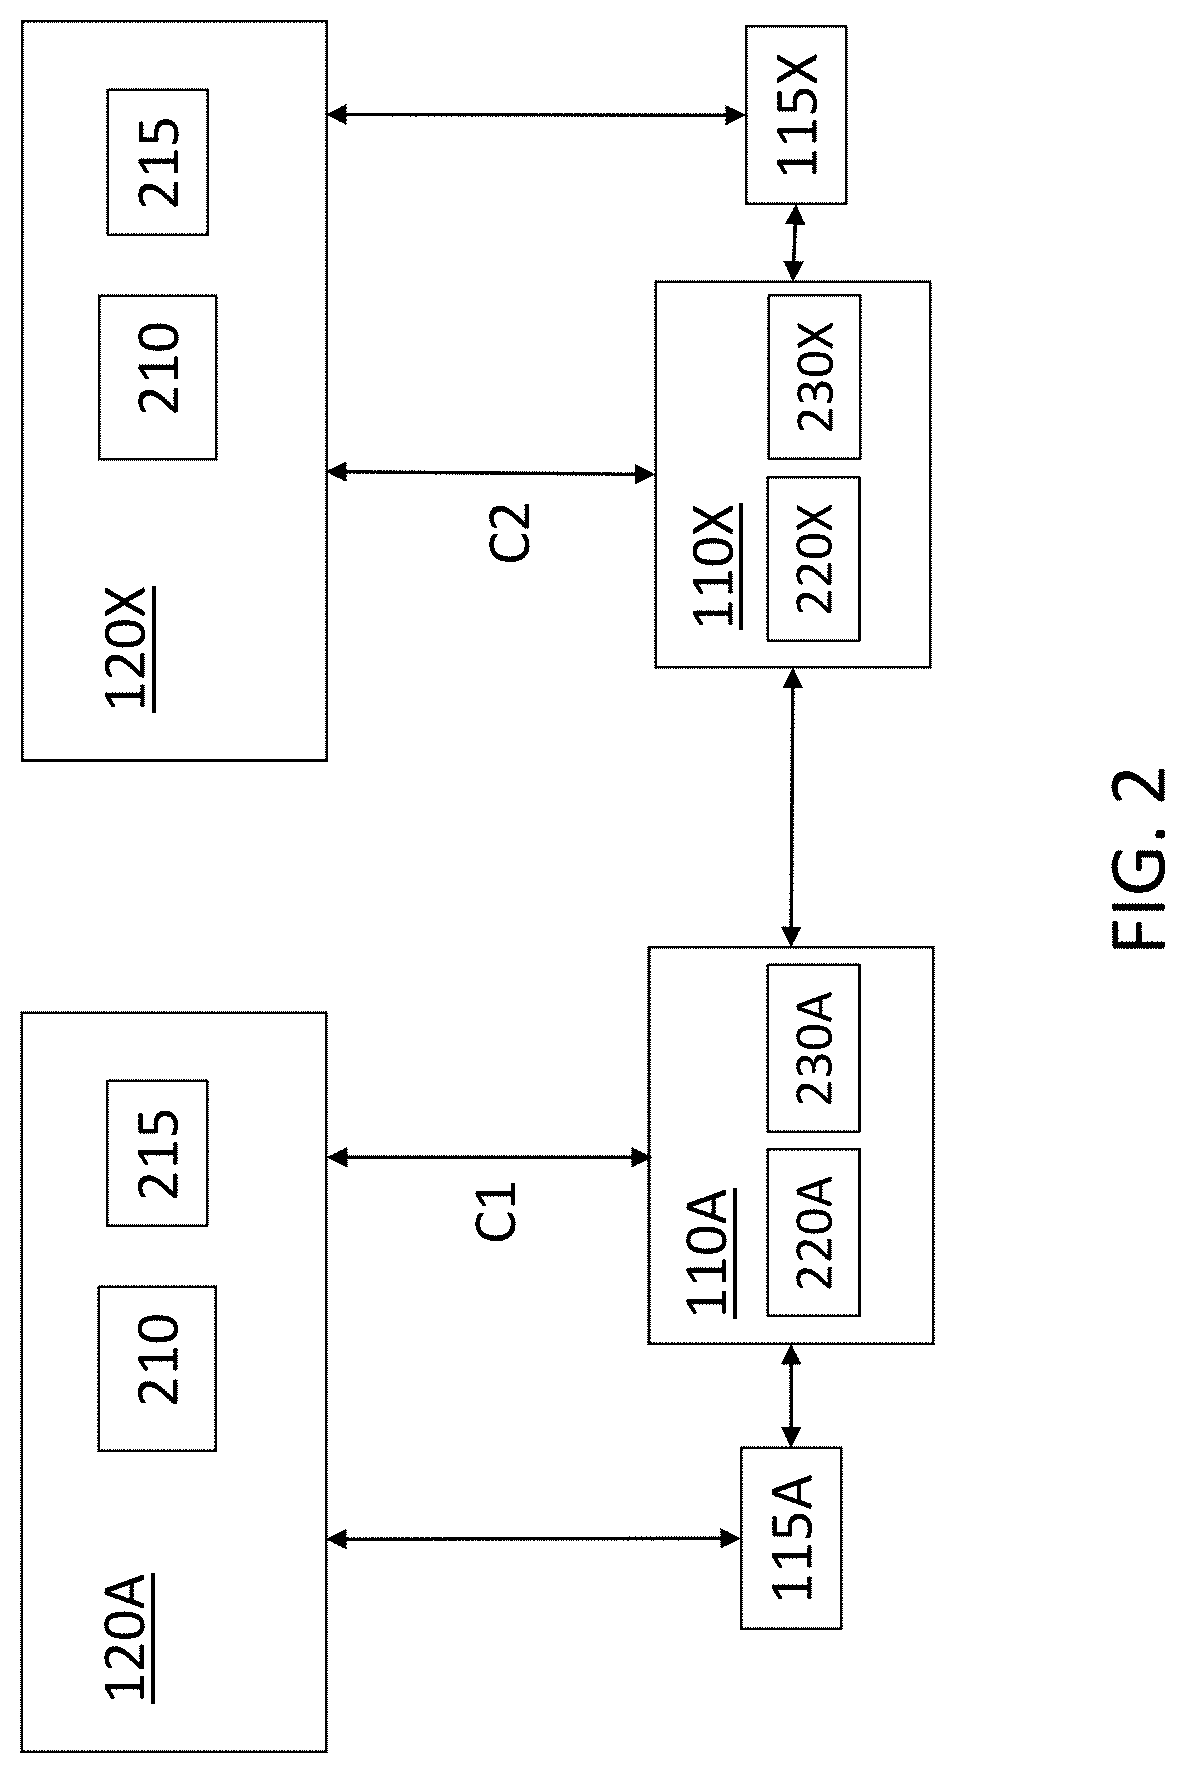 Notification of controller fault using message authentication code